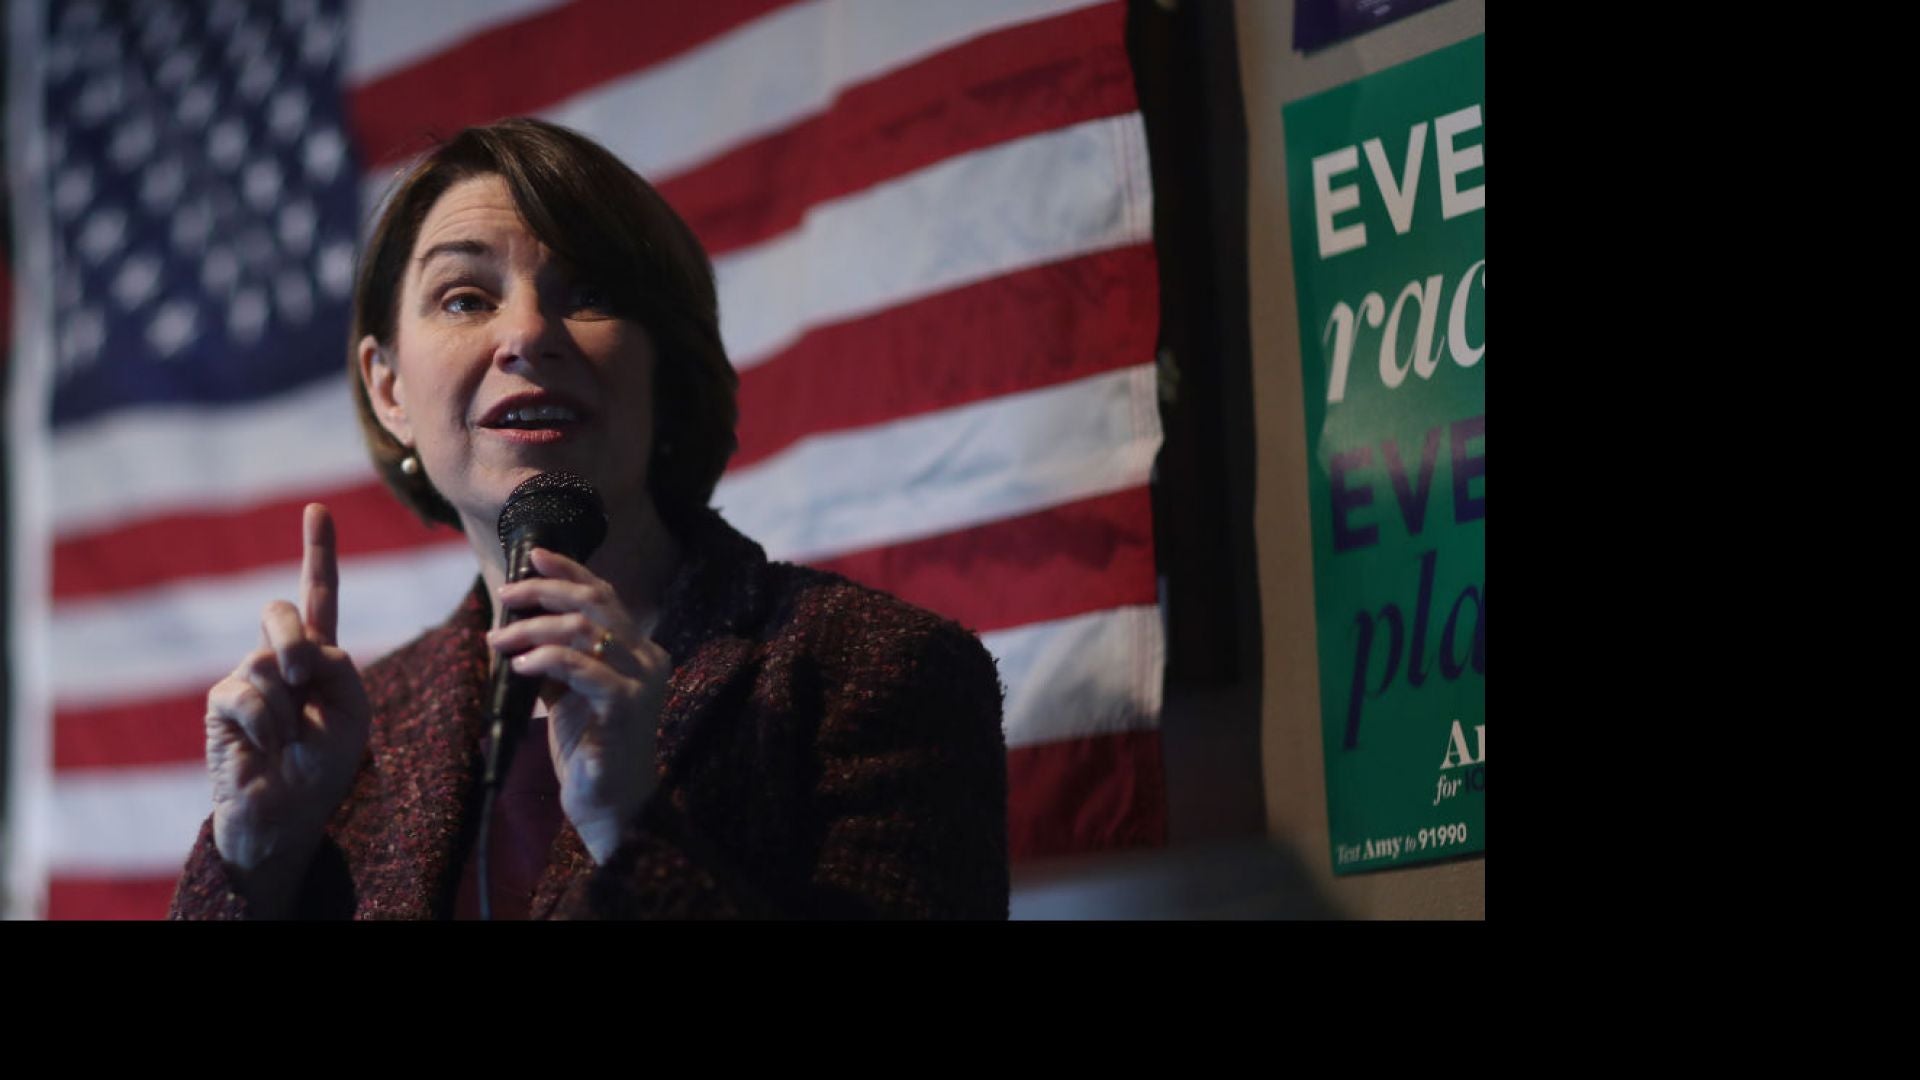 'Tough-On-Crime' Amy Klobuchar Accepted Donation From Exonerated Five Prosecutor Linda Fairstein